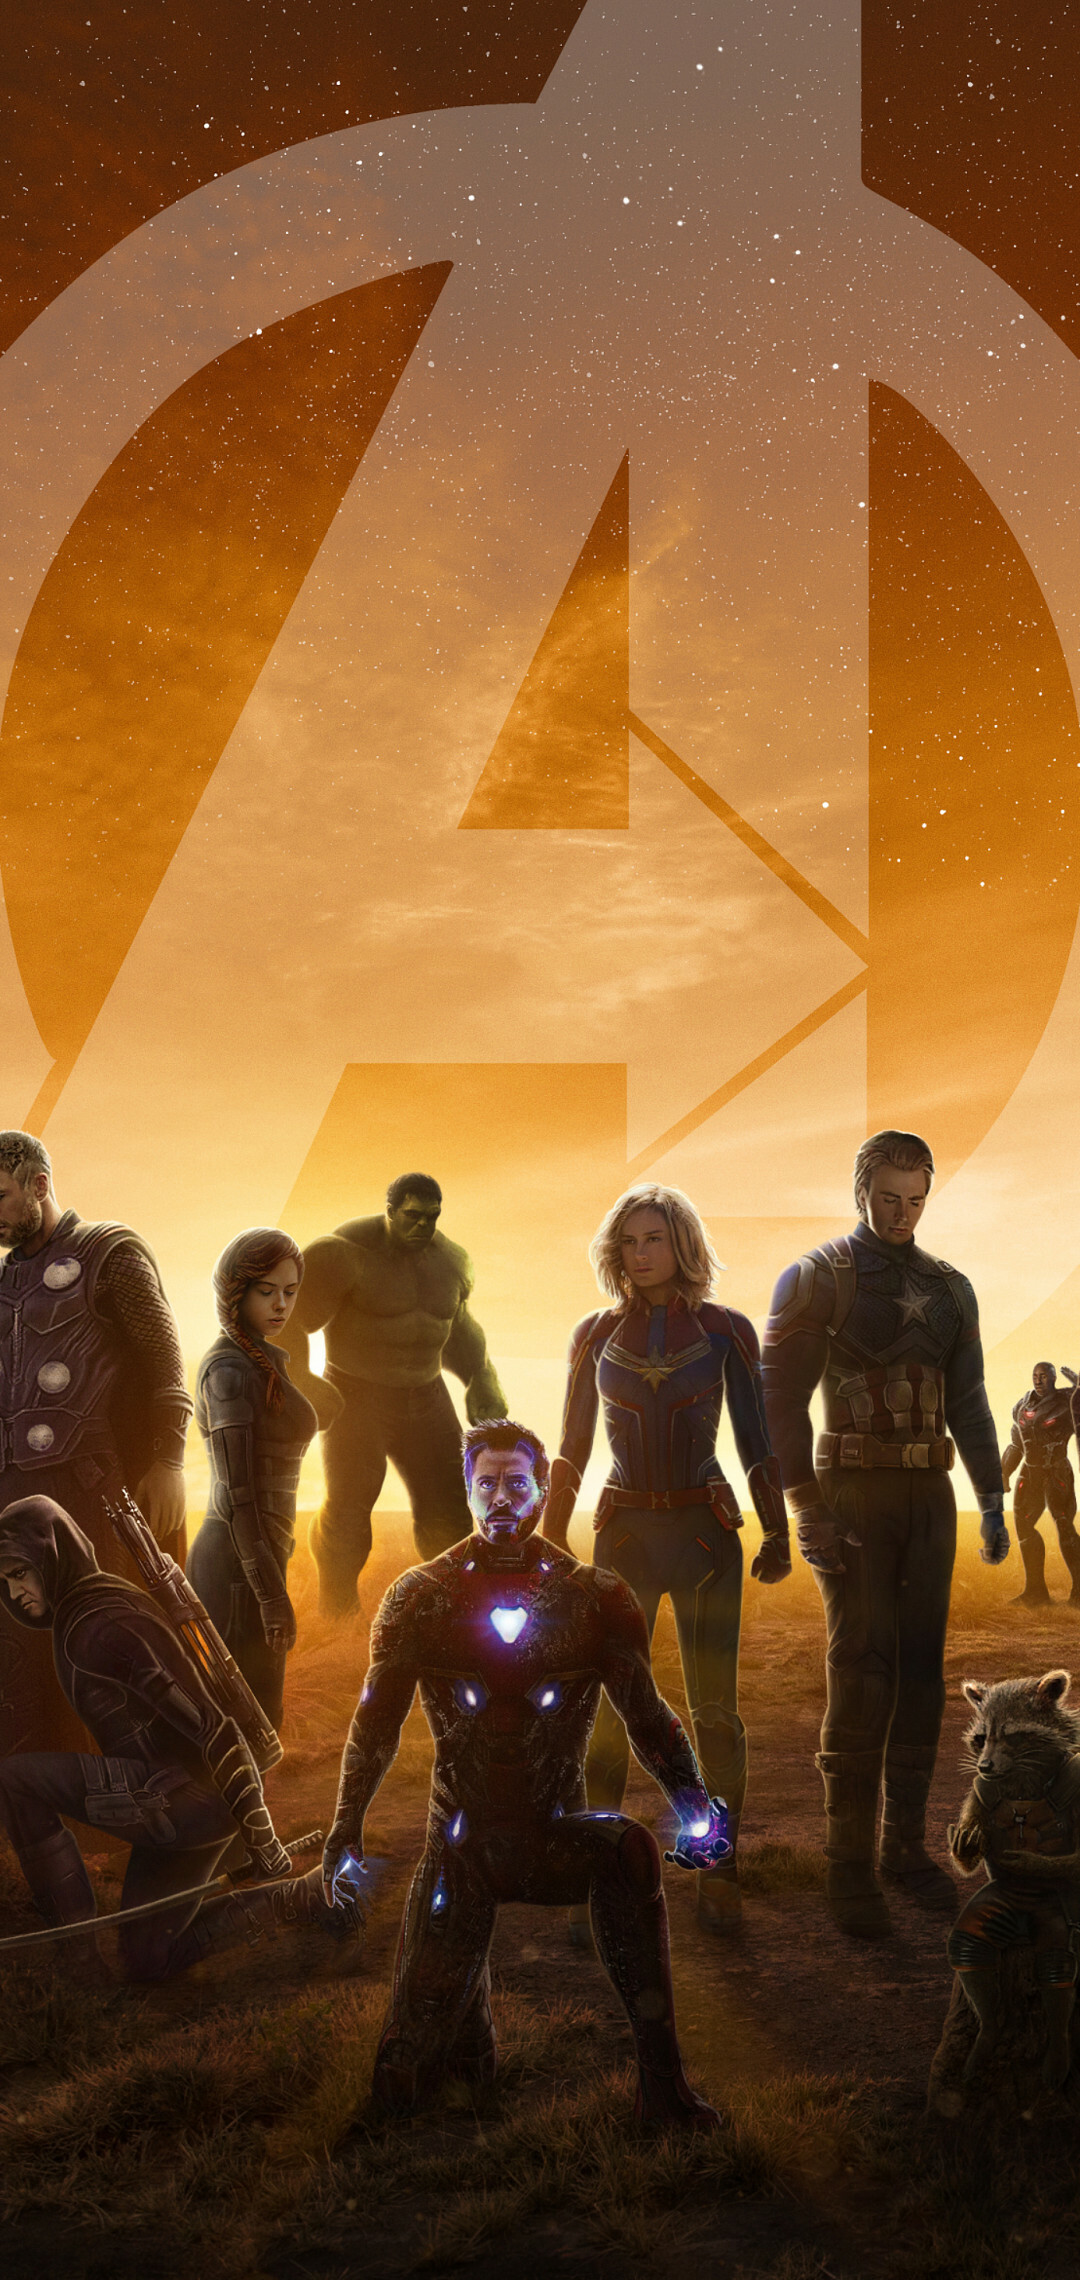 Avengers: The film was released on both Digital HD and Blu-ray on September 2 in the UK, Marvel. 1080x2280 HD Wallpaper.